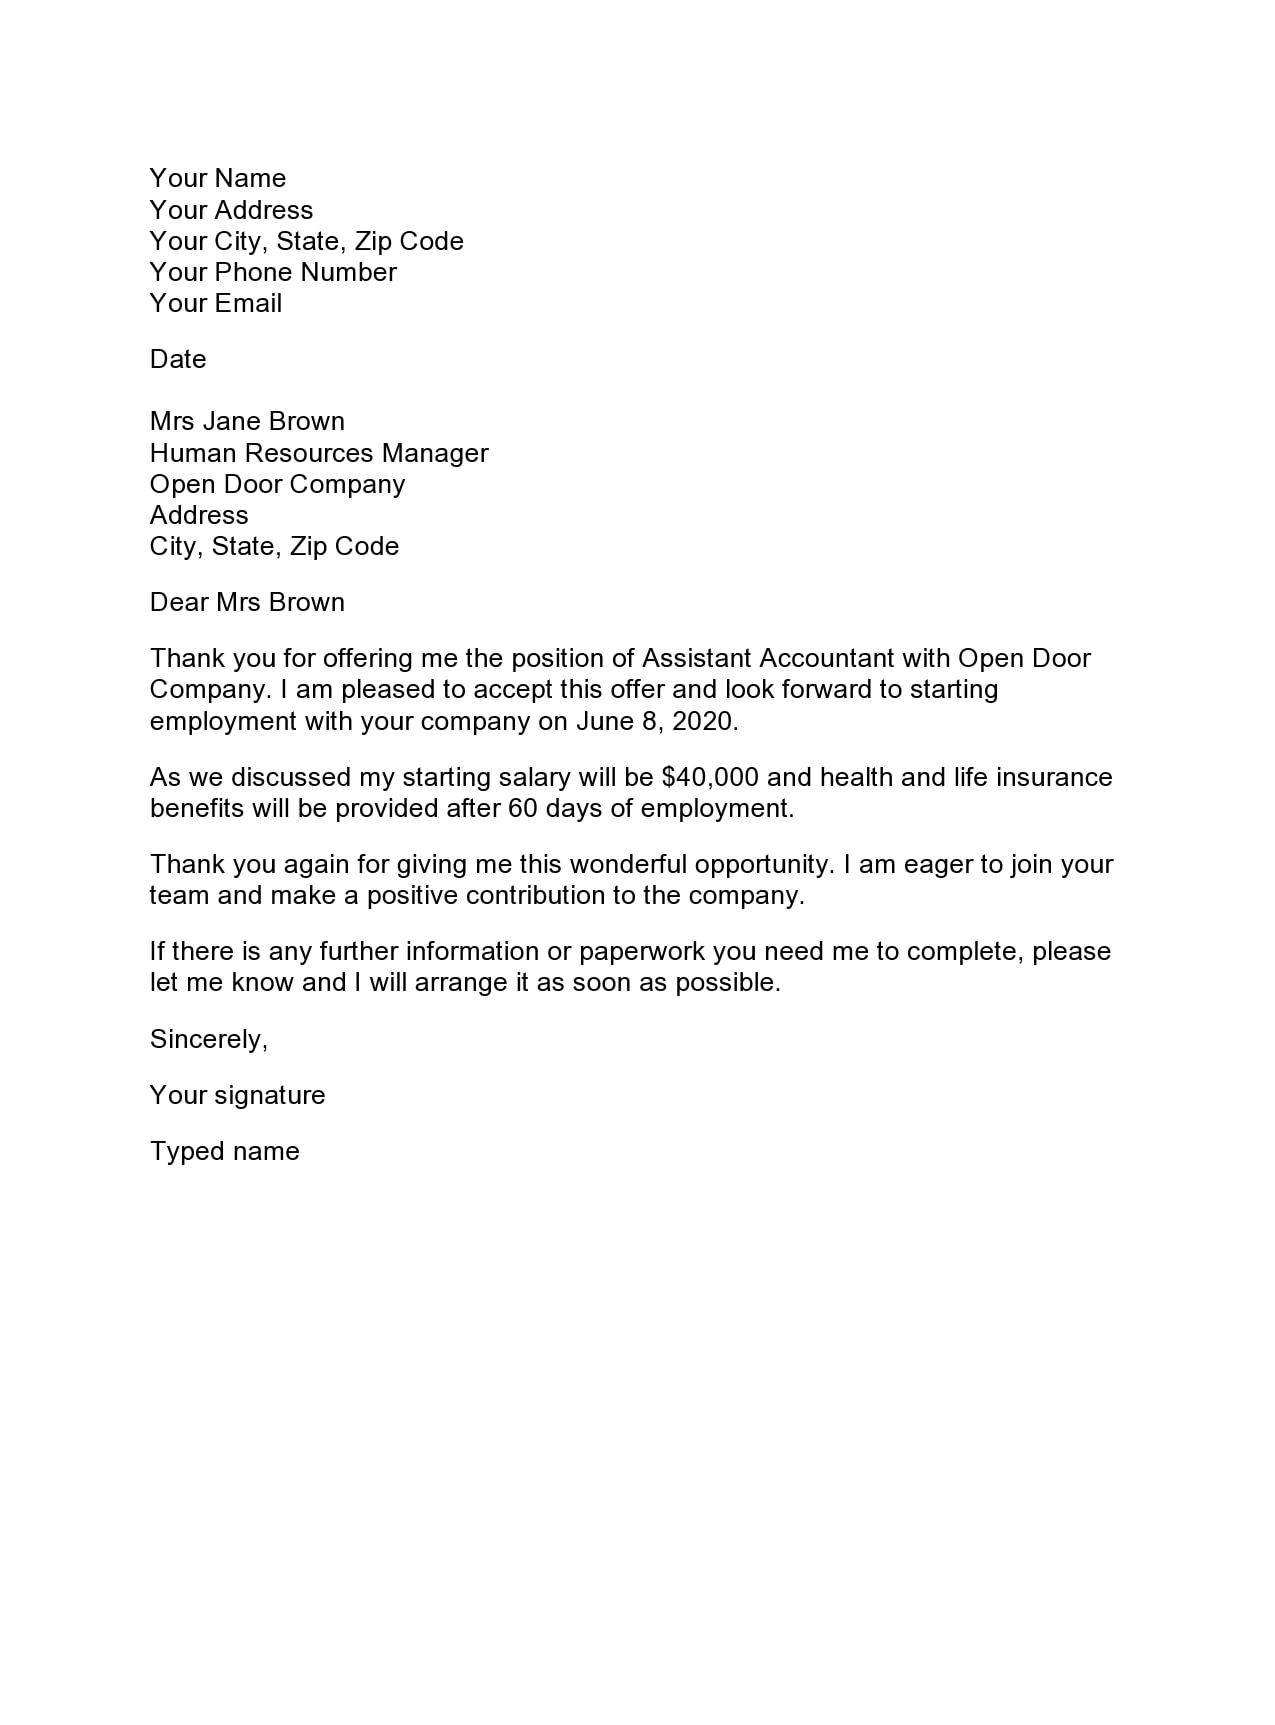 Thank you letter to accept job offer